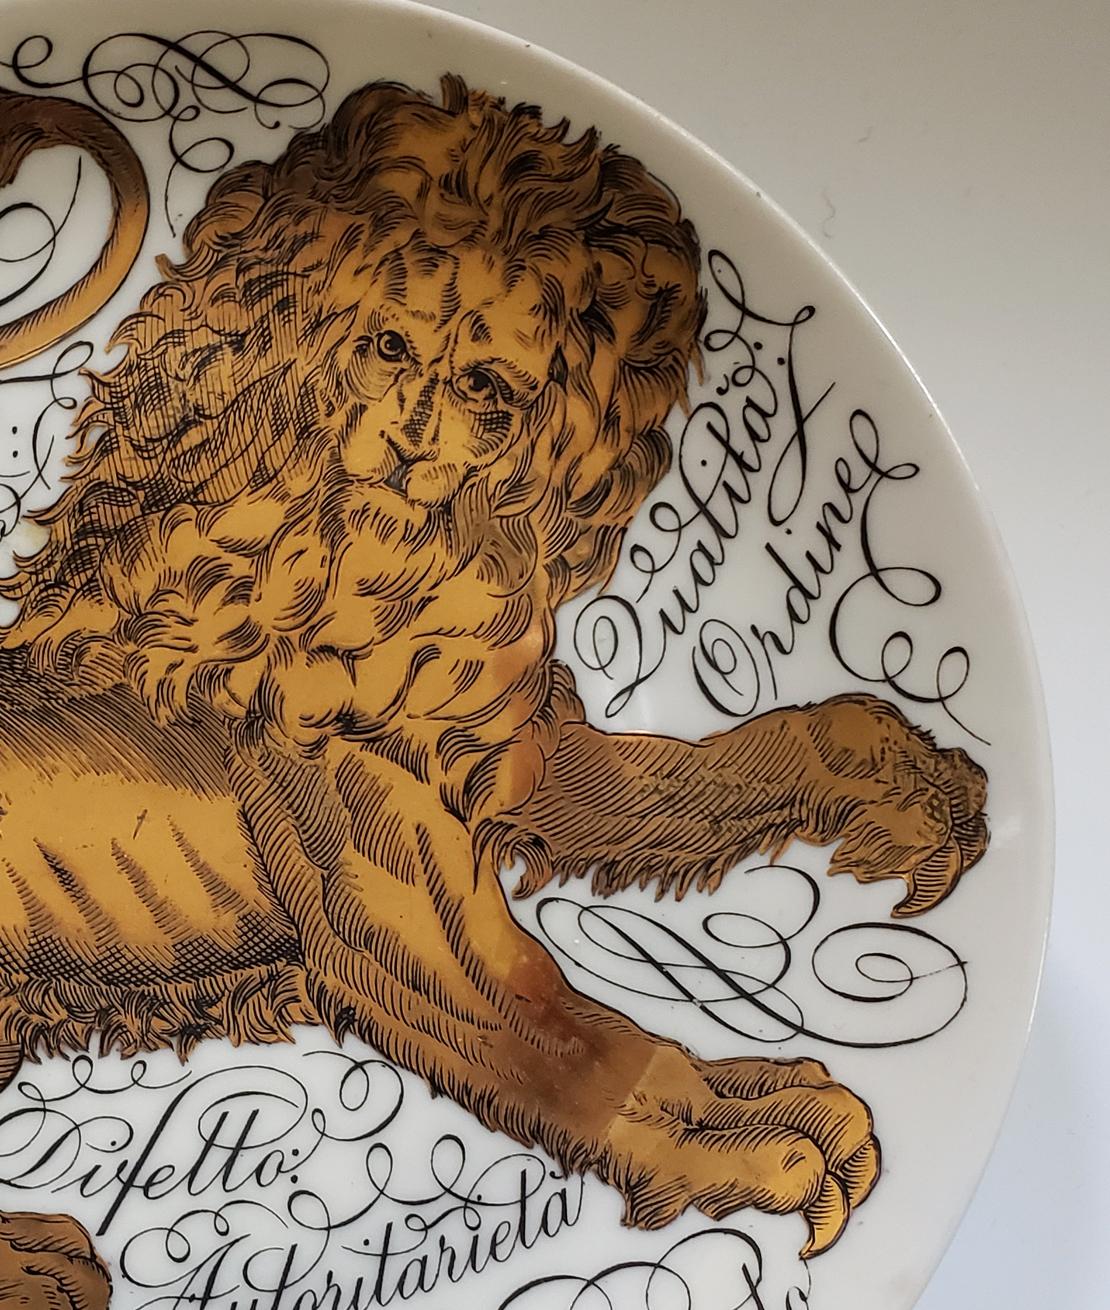 Vintage Piero Fornasetti Porcelain zodiac plate,
Leo,
Astrali Pattern,
Made for Corisia,
Dated 1965, No 2.

The plate for the sign LEO is dated 1965 and is numbered #2. The plate depicts the Astrological Zodiac sign Leo which is painted in